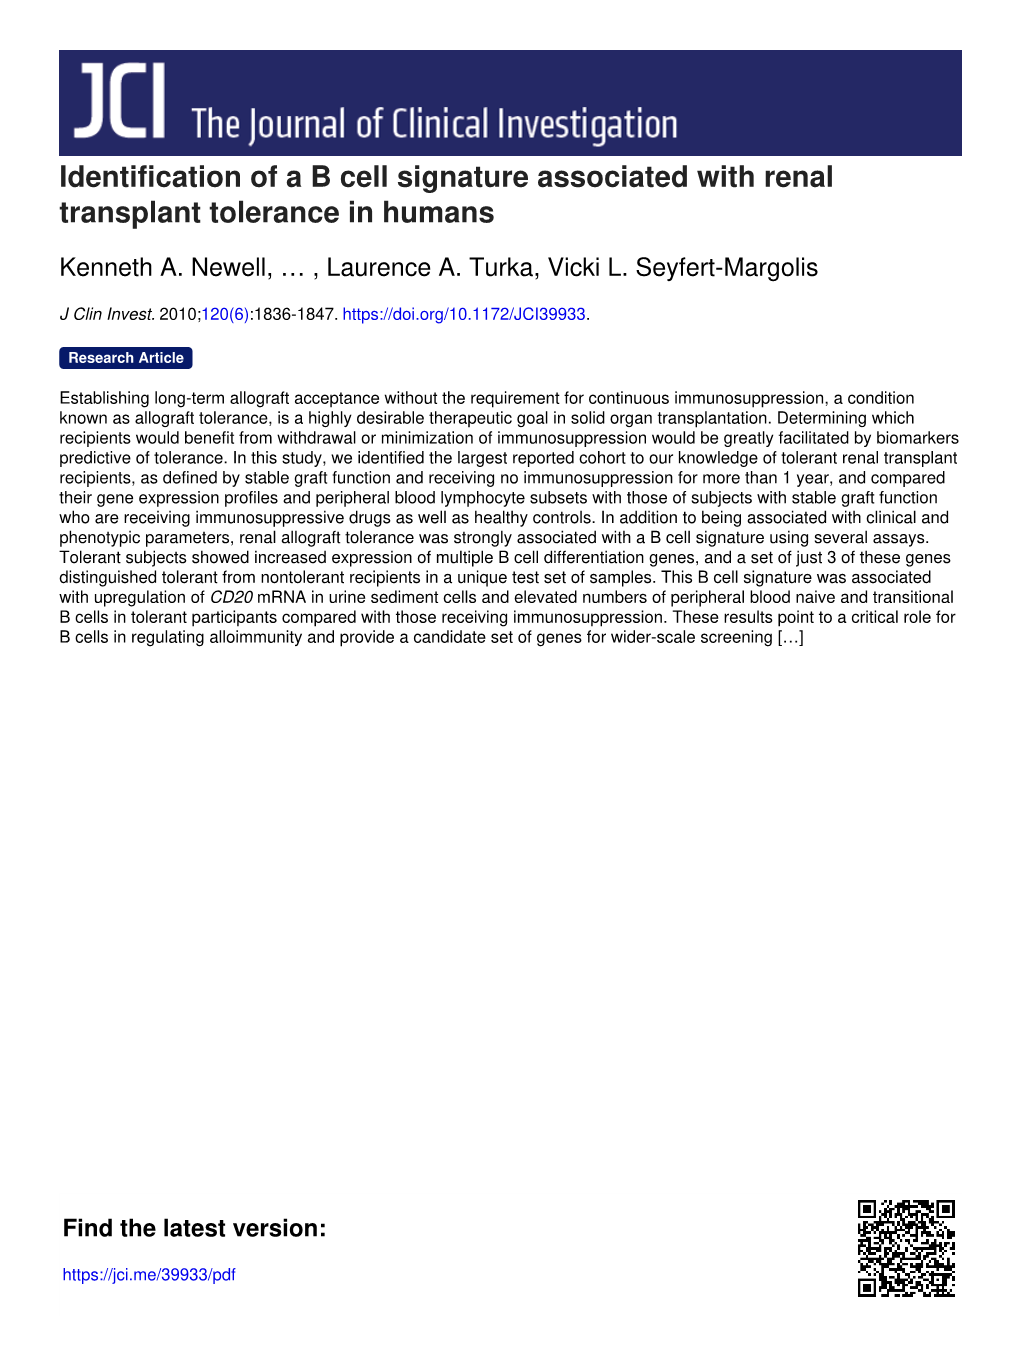 Identification of a B Cell Signature Associated with Renal Transplant Tolerance in Humans